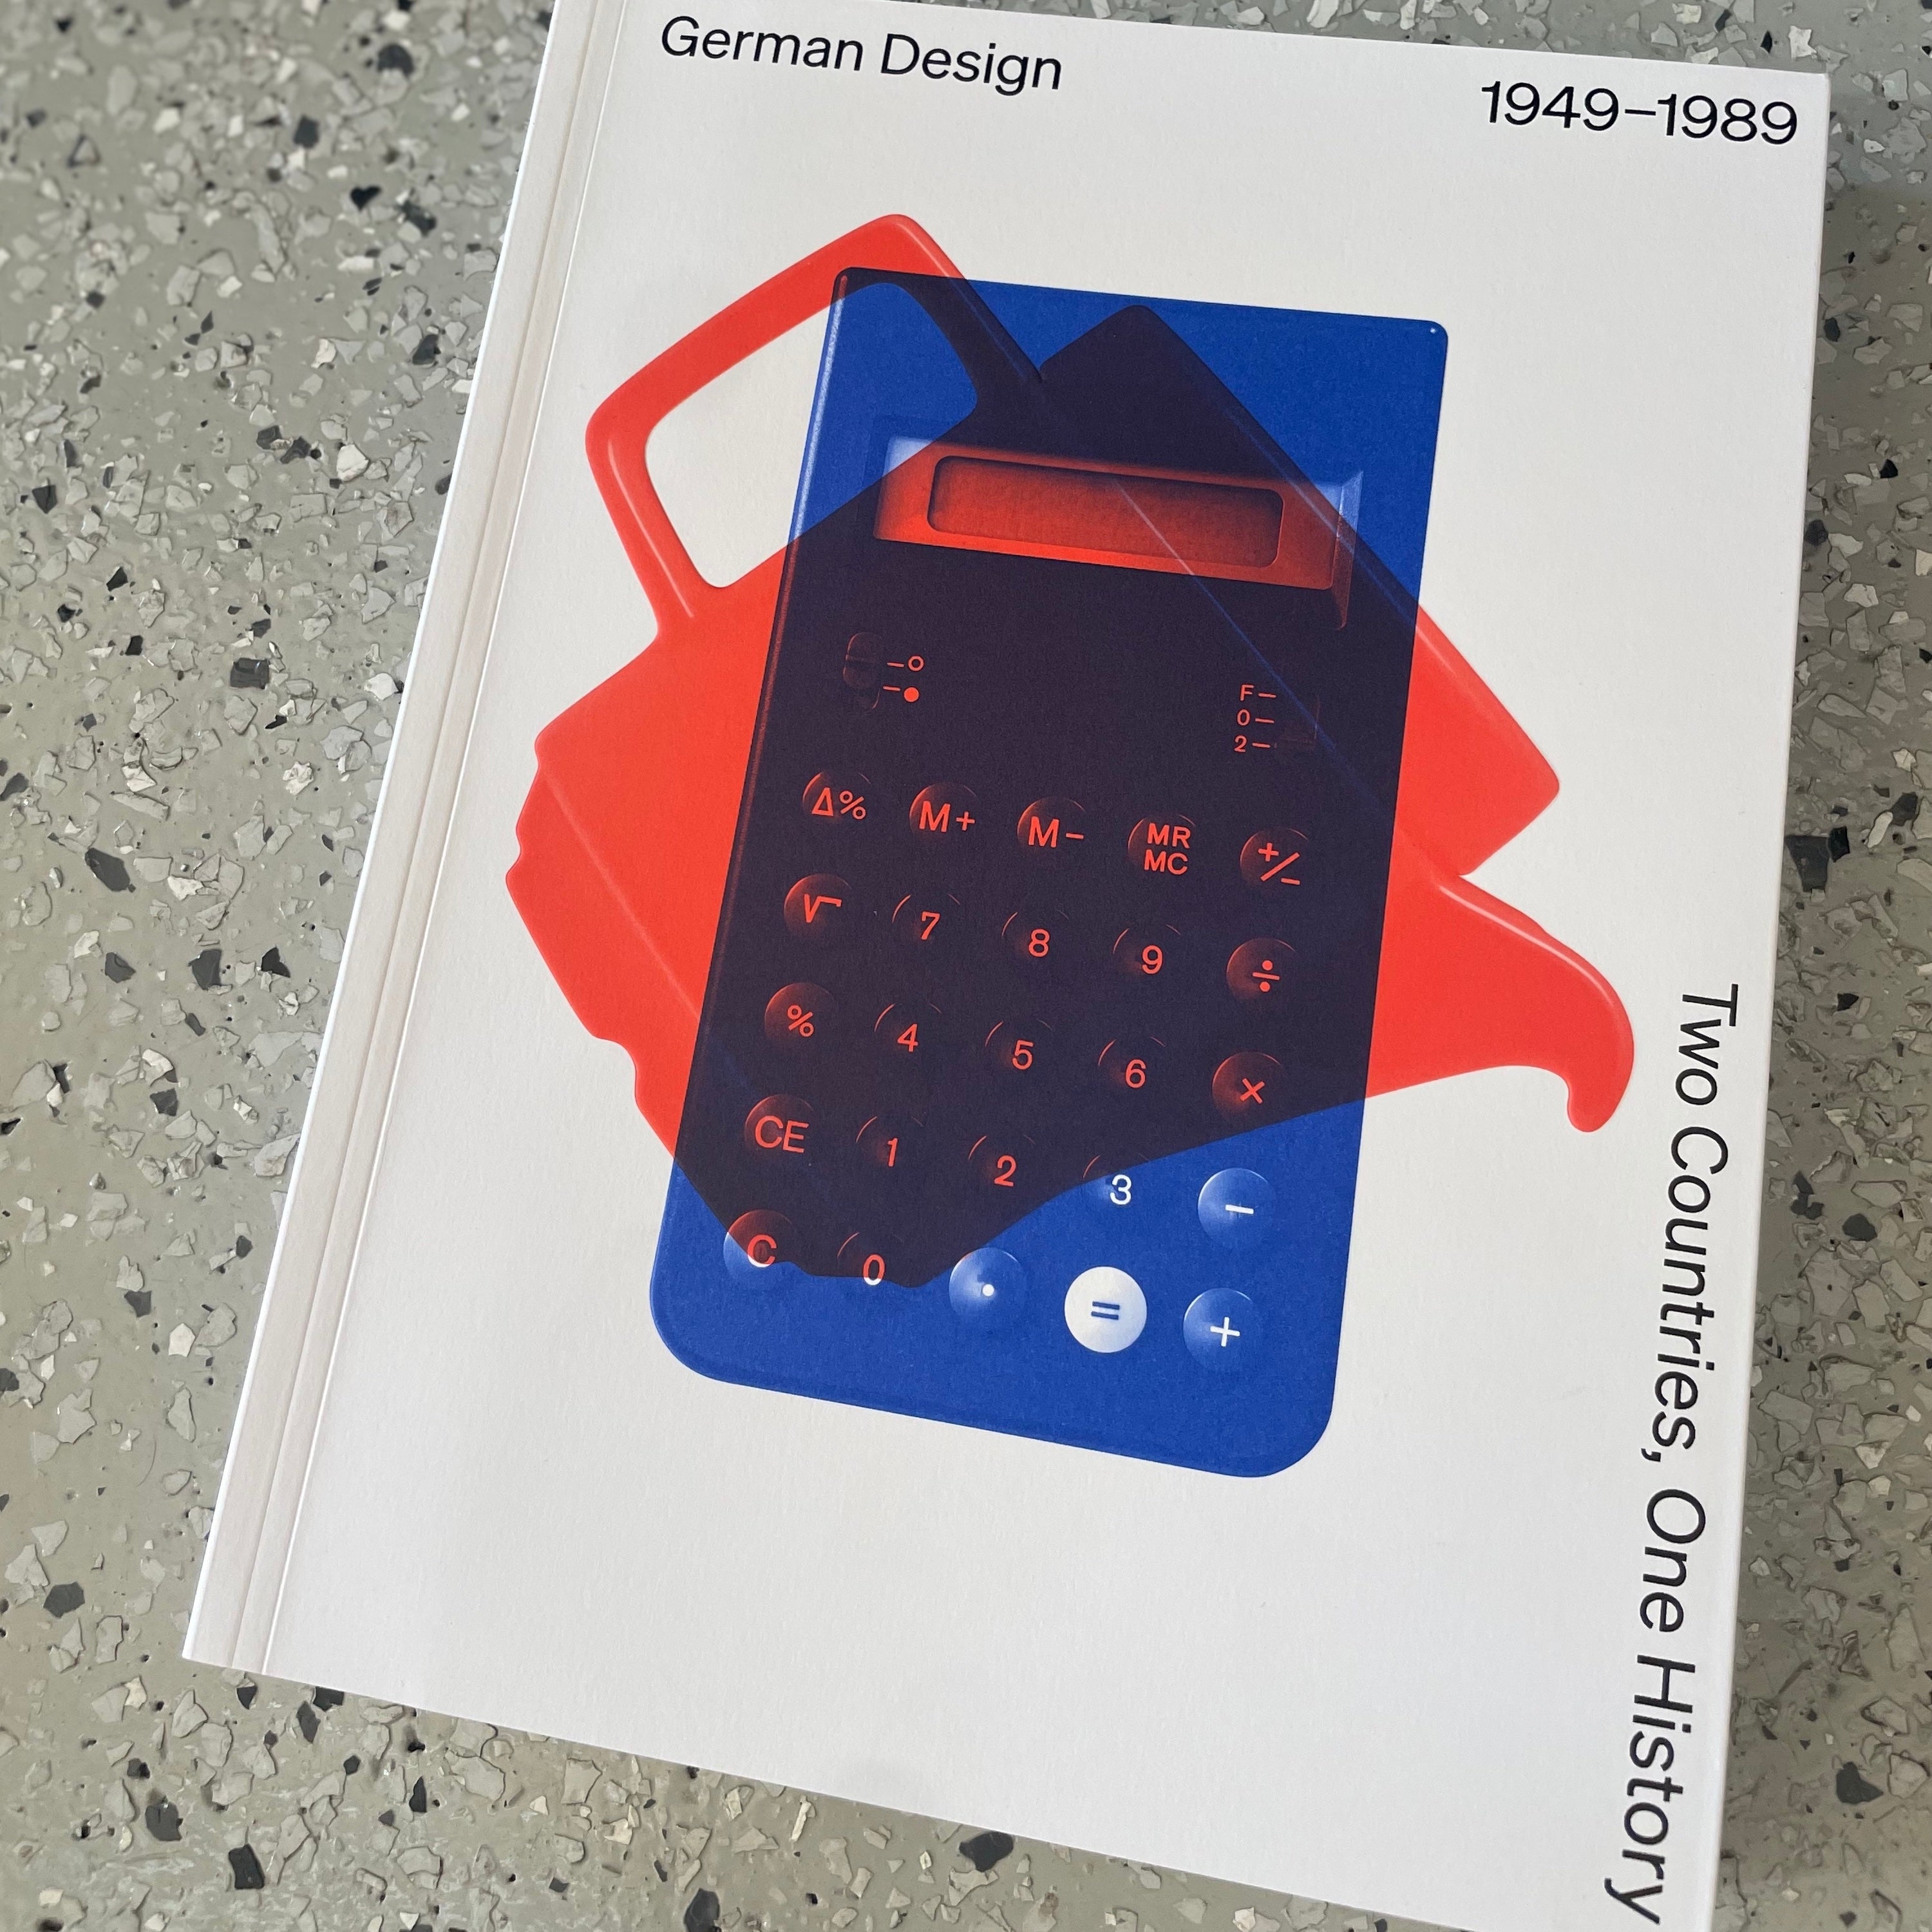 German Design: Two Countries, One History 1949-1989